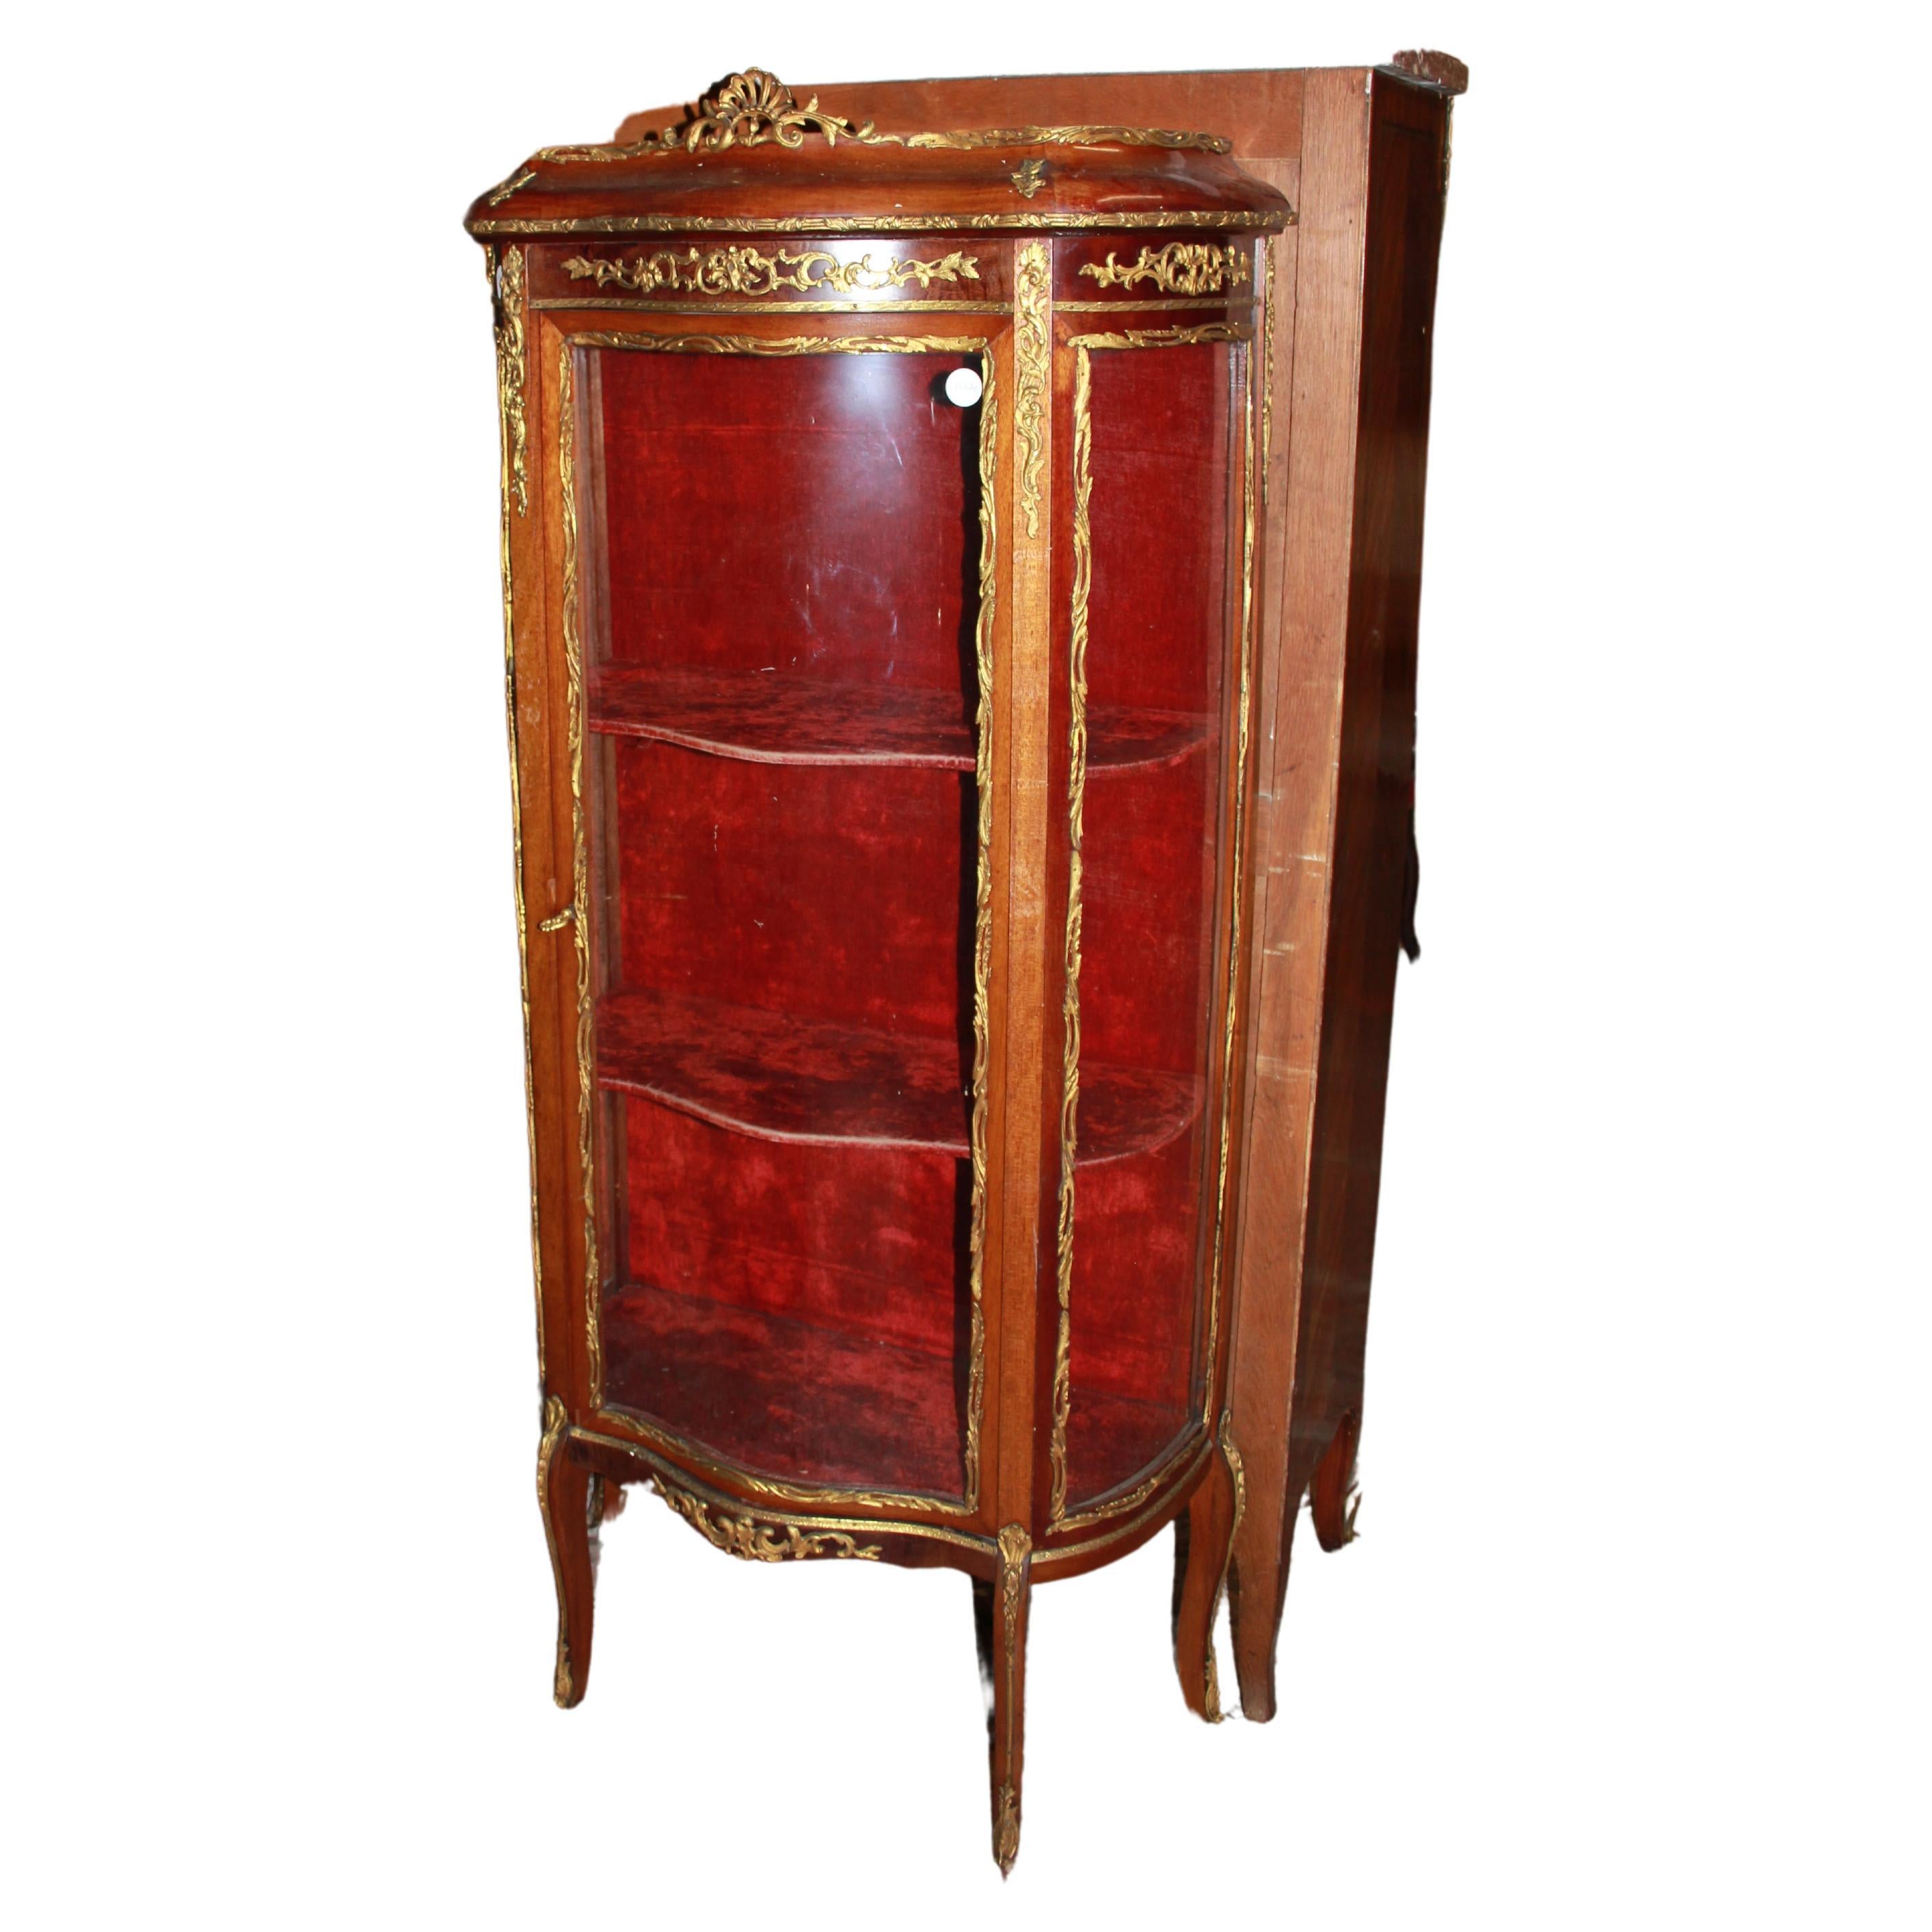  French display cabinet in Transition style from the 1800s, made of mahogany  For Sale